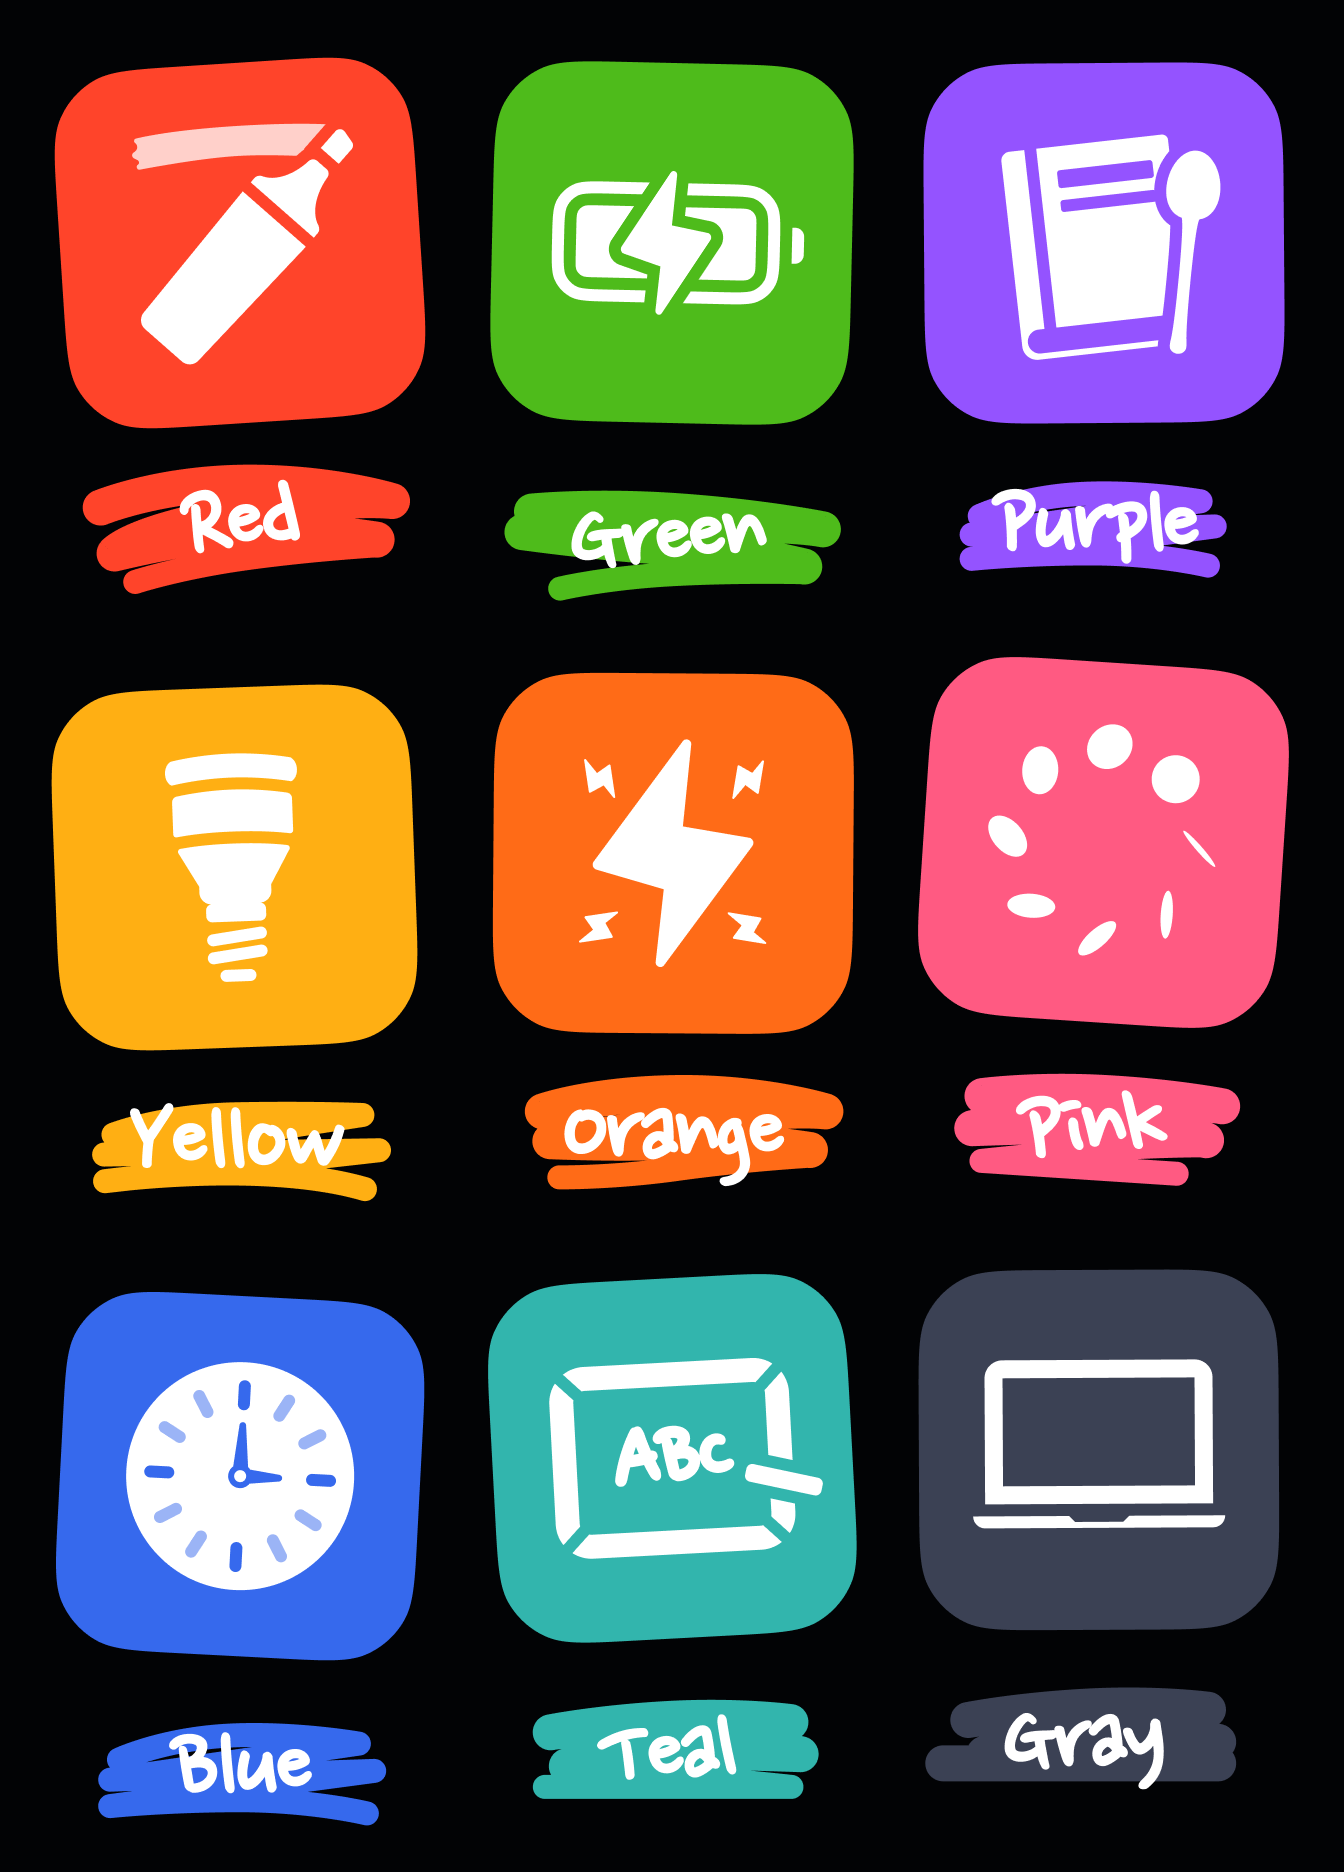 An image showing all the different colors offered in this set of icons: red, green, blue, yellow, orange, pink, teal, and gray.